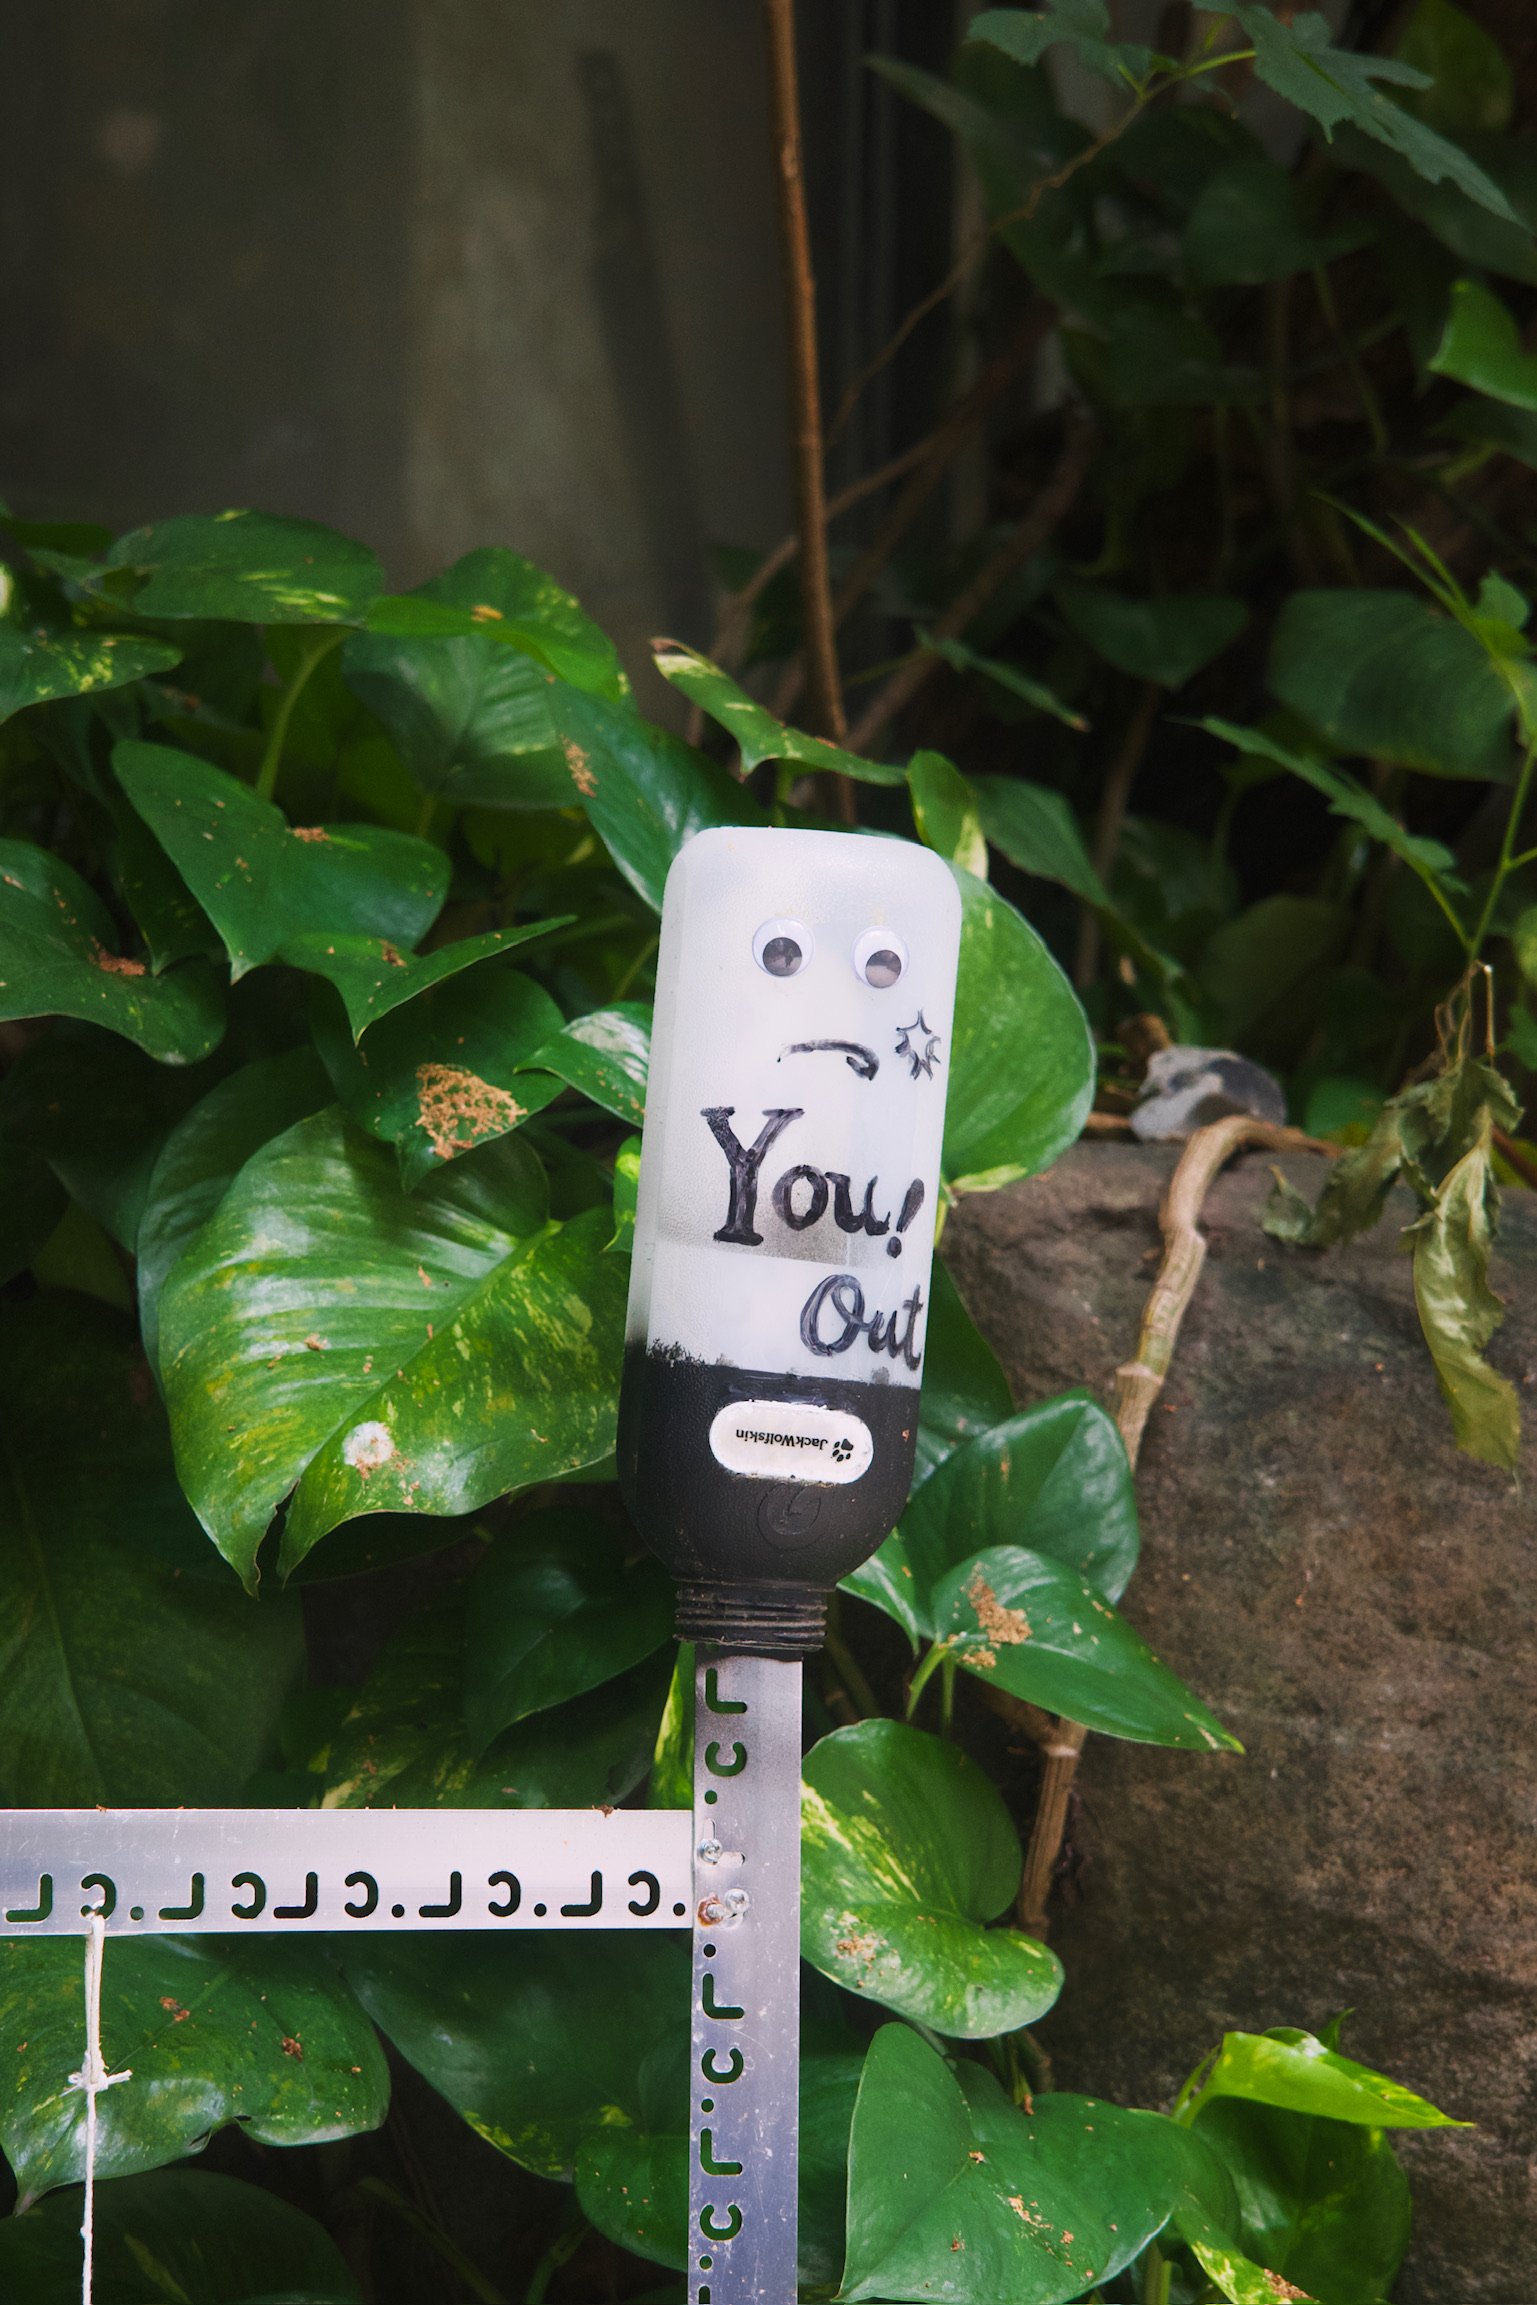 A plastic bottle with googly eyes and a sad mouth with text reading “You! Out!”.